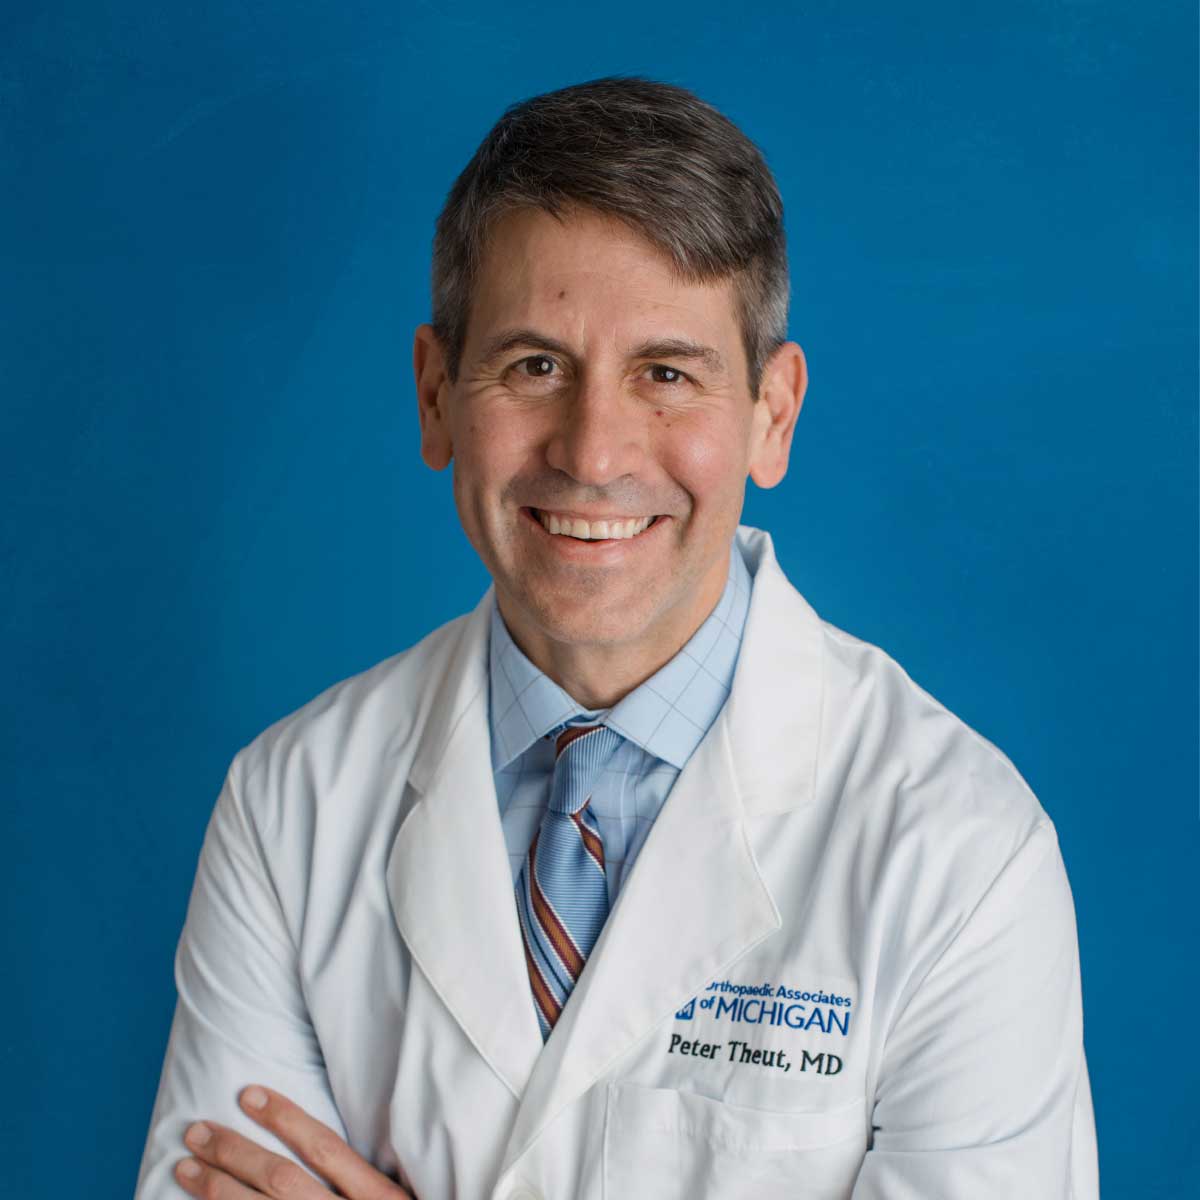 Peter Theut, MD - Orthopedic Specialists in Greater Grand Rapids, MI